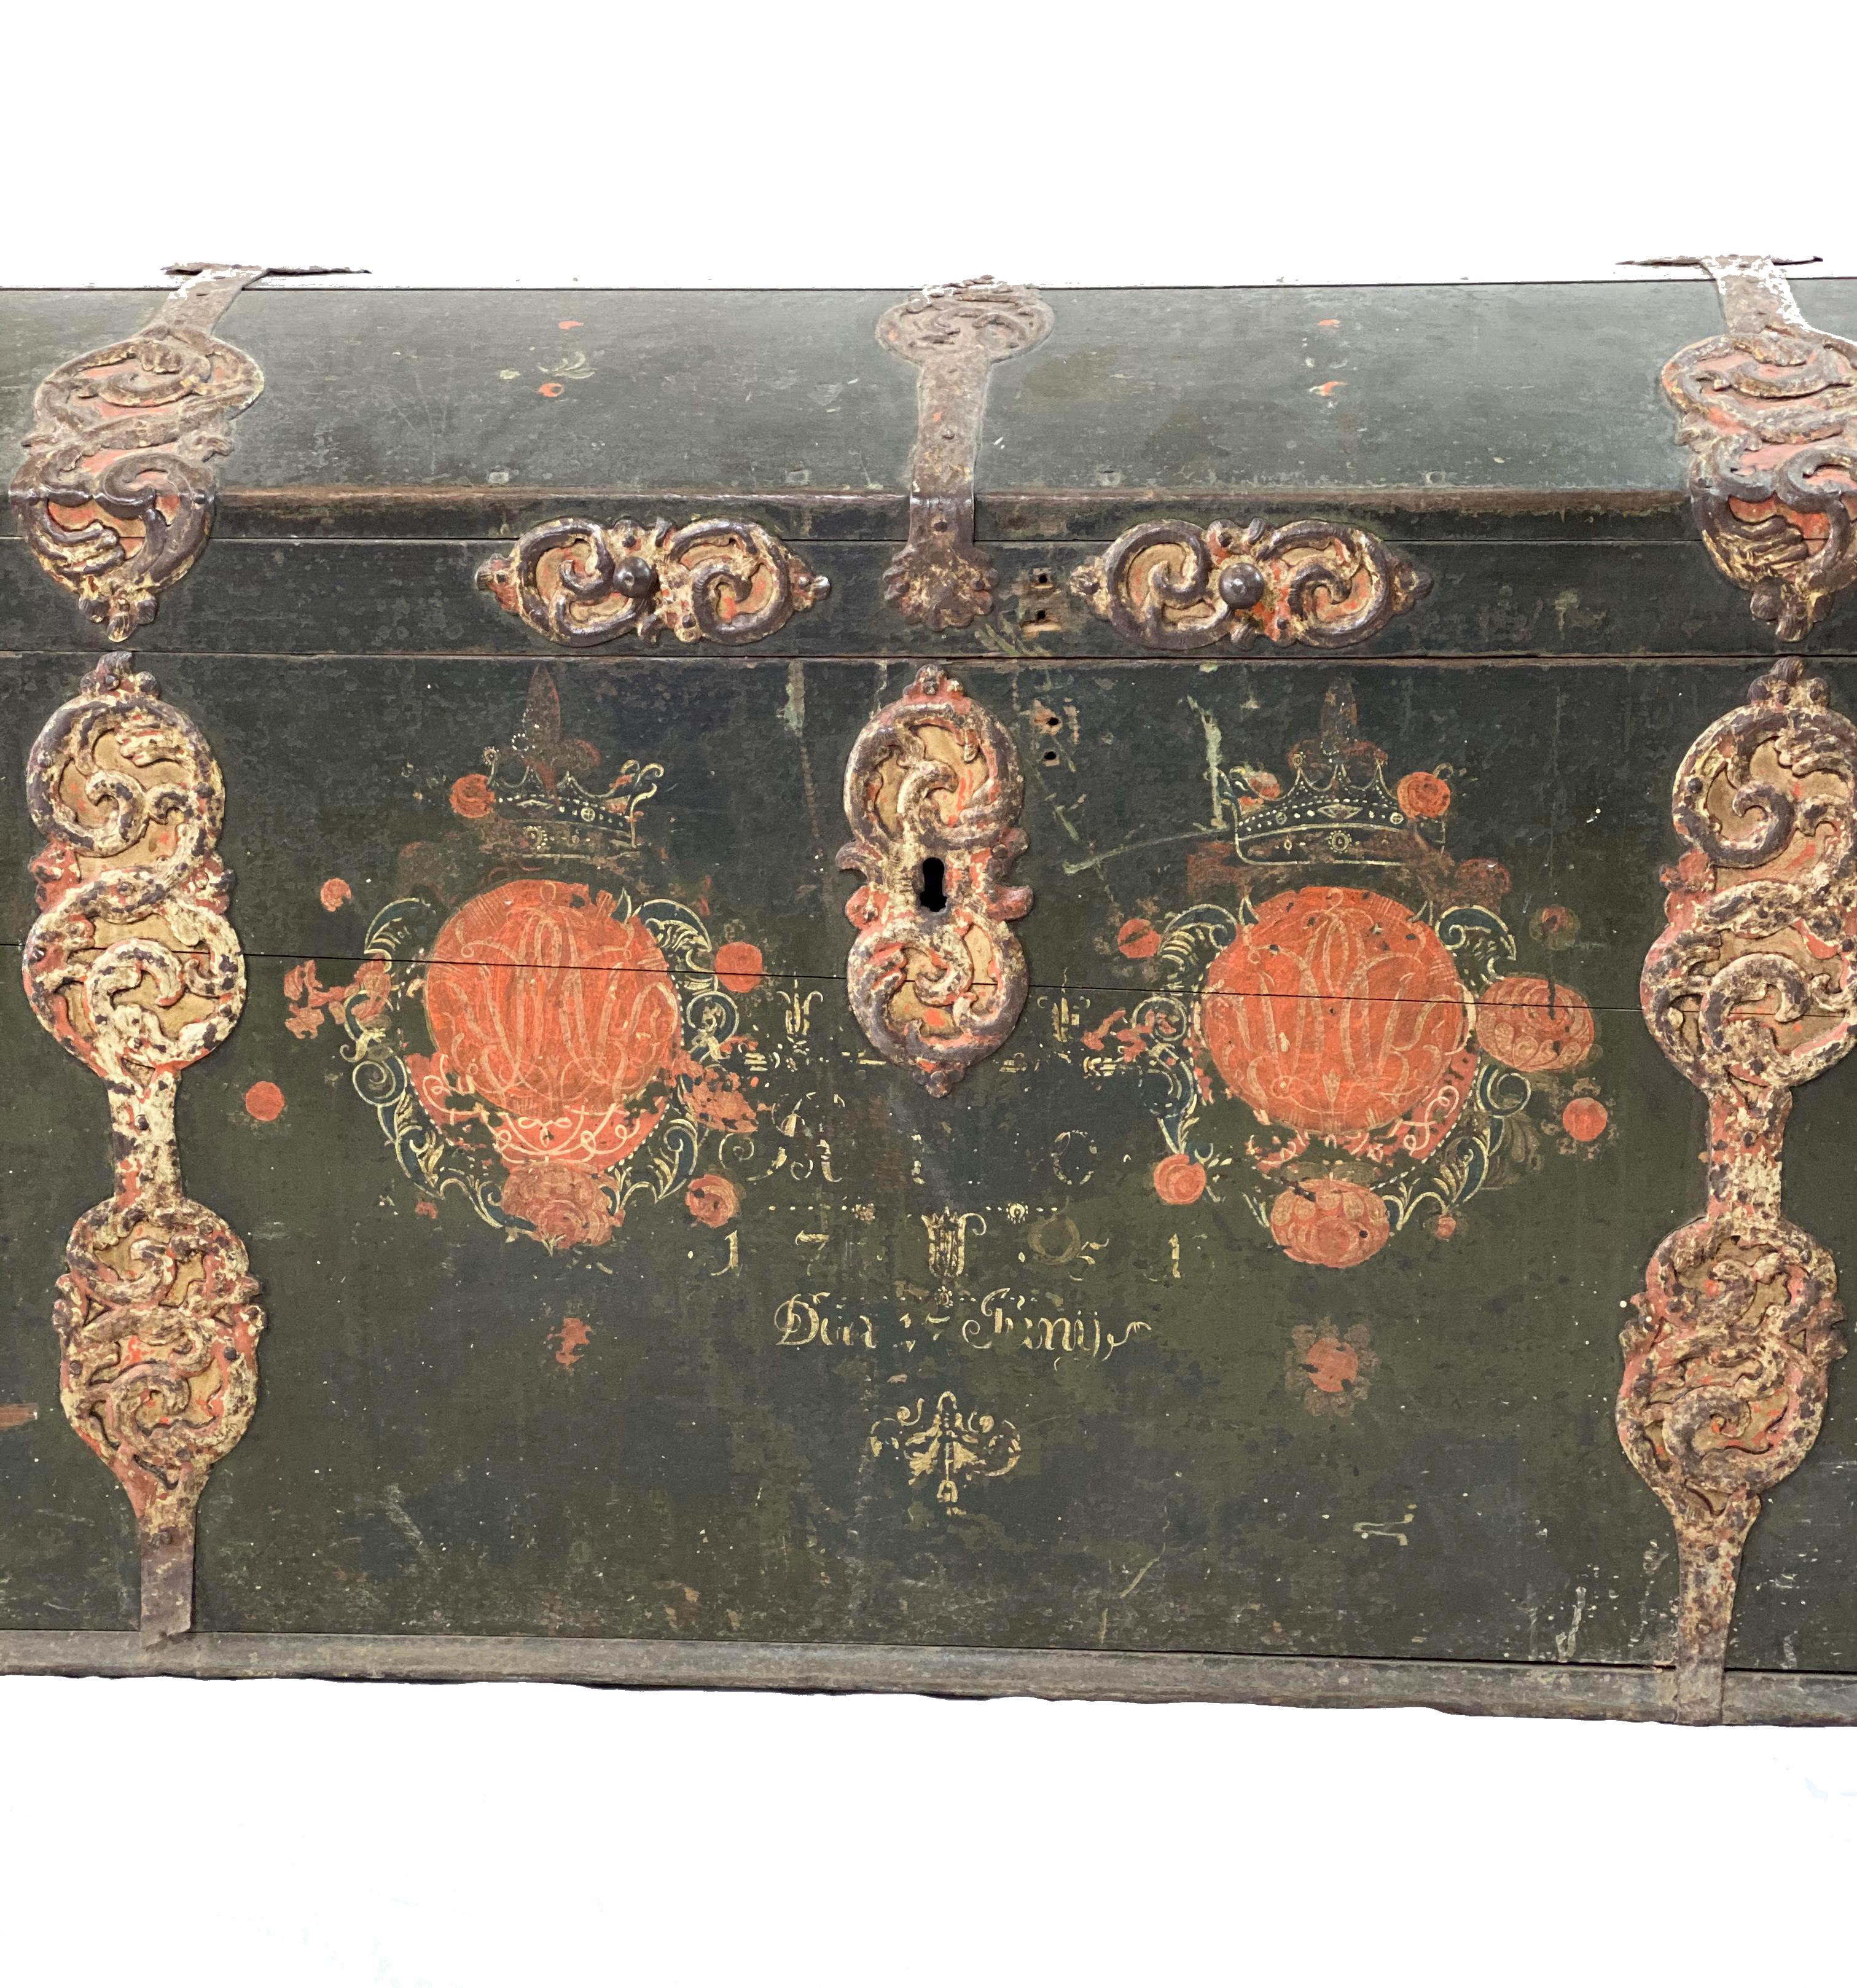 Huge 18th century Swedish wedding chest, possibly from royal family. Note inside trunk reads... with mirror monogram and year 1751. Bought by Linder from Selso at Lauritz Christensen auction house in 1972. 
Gorgeous hardware.